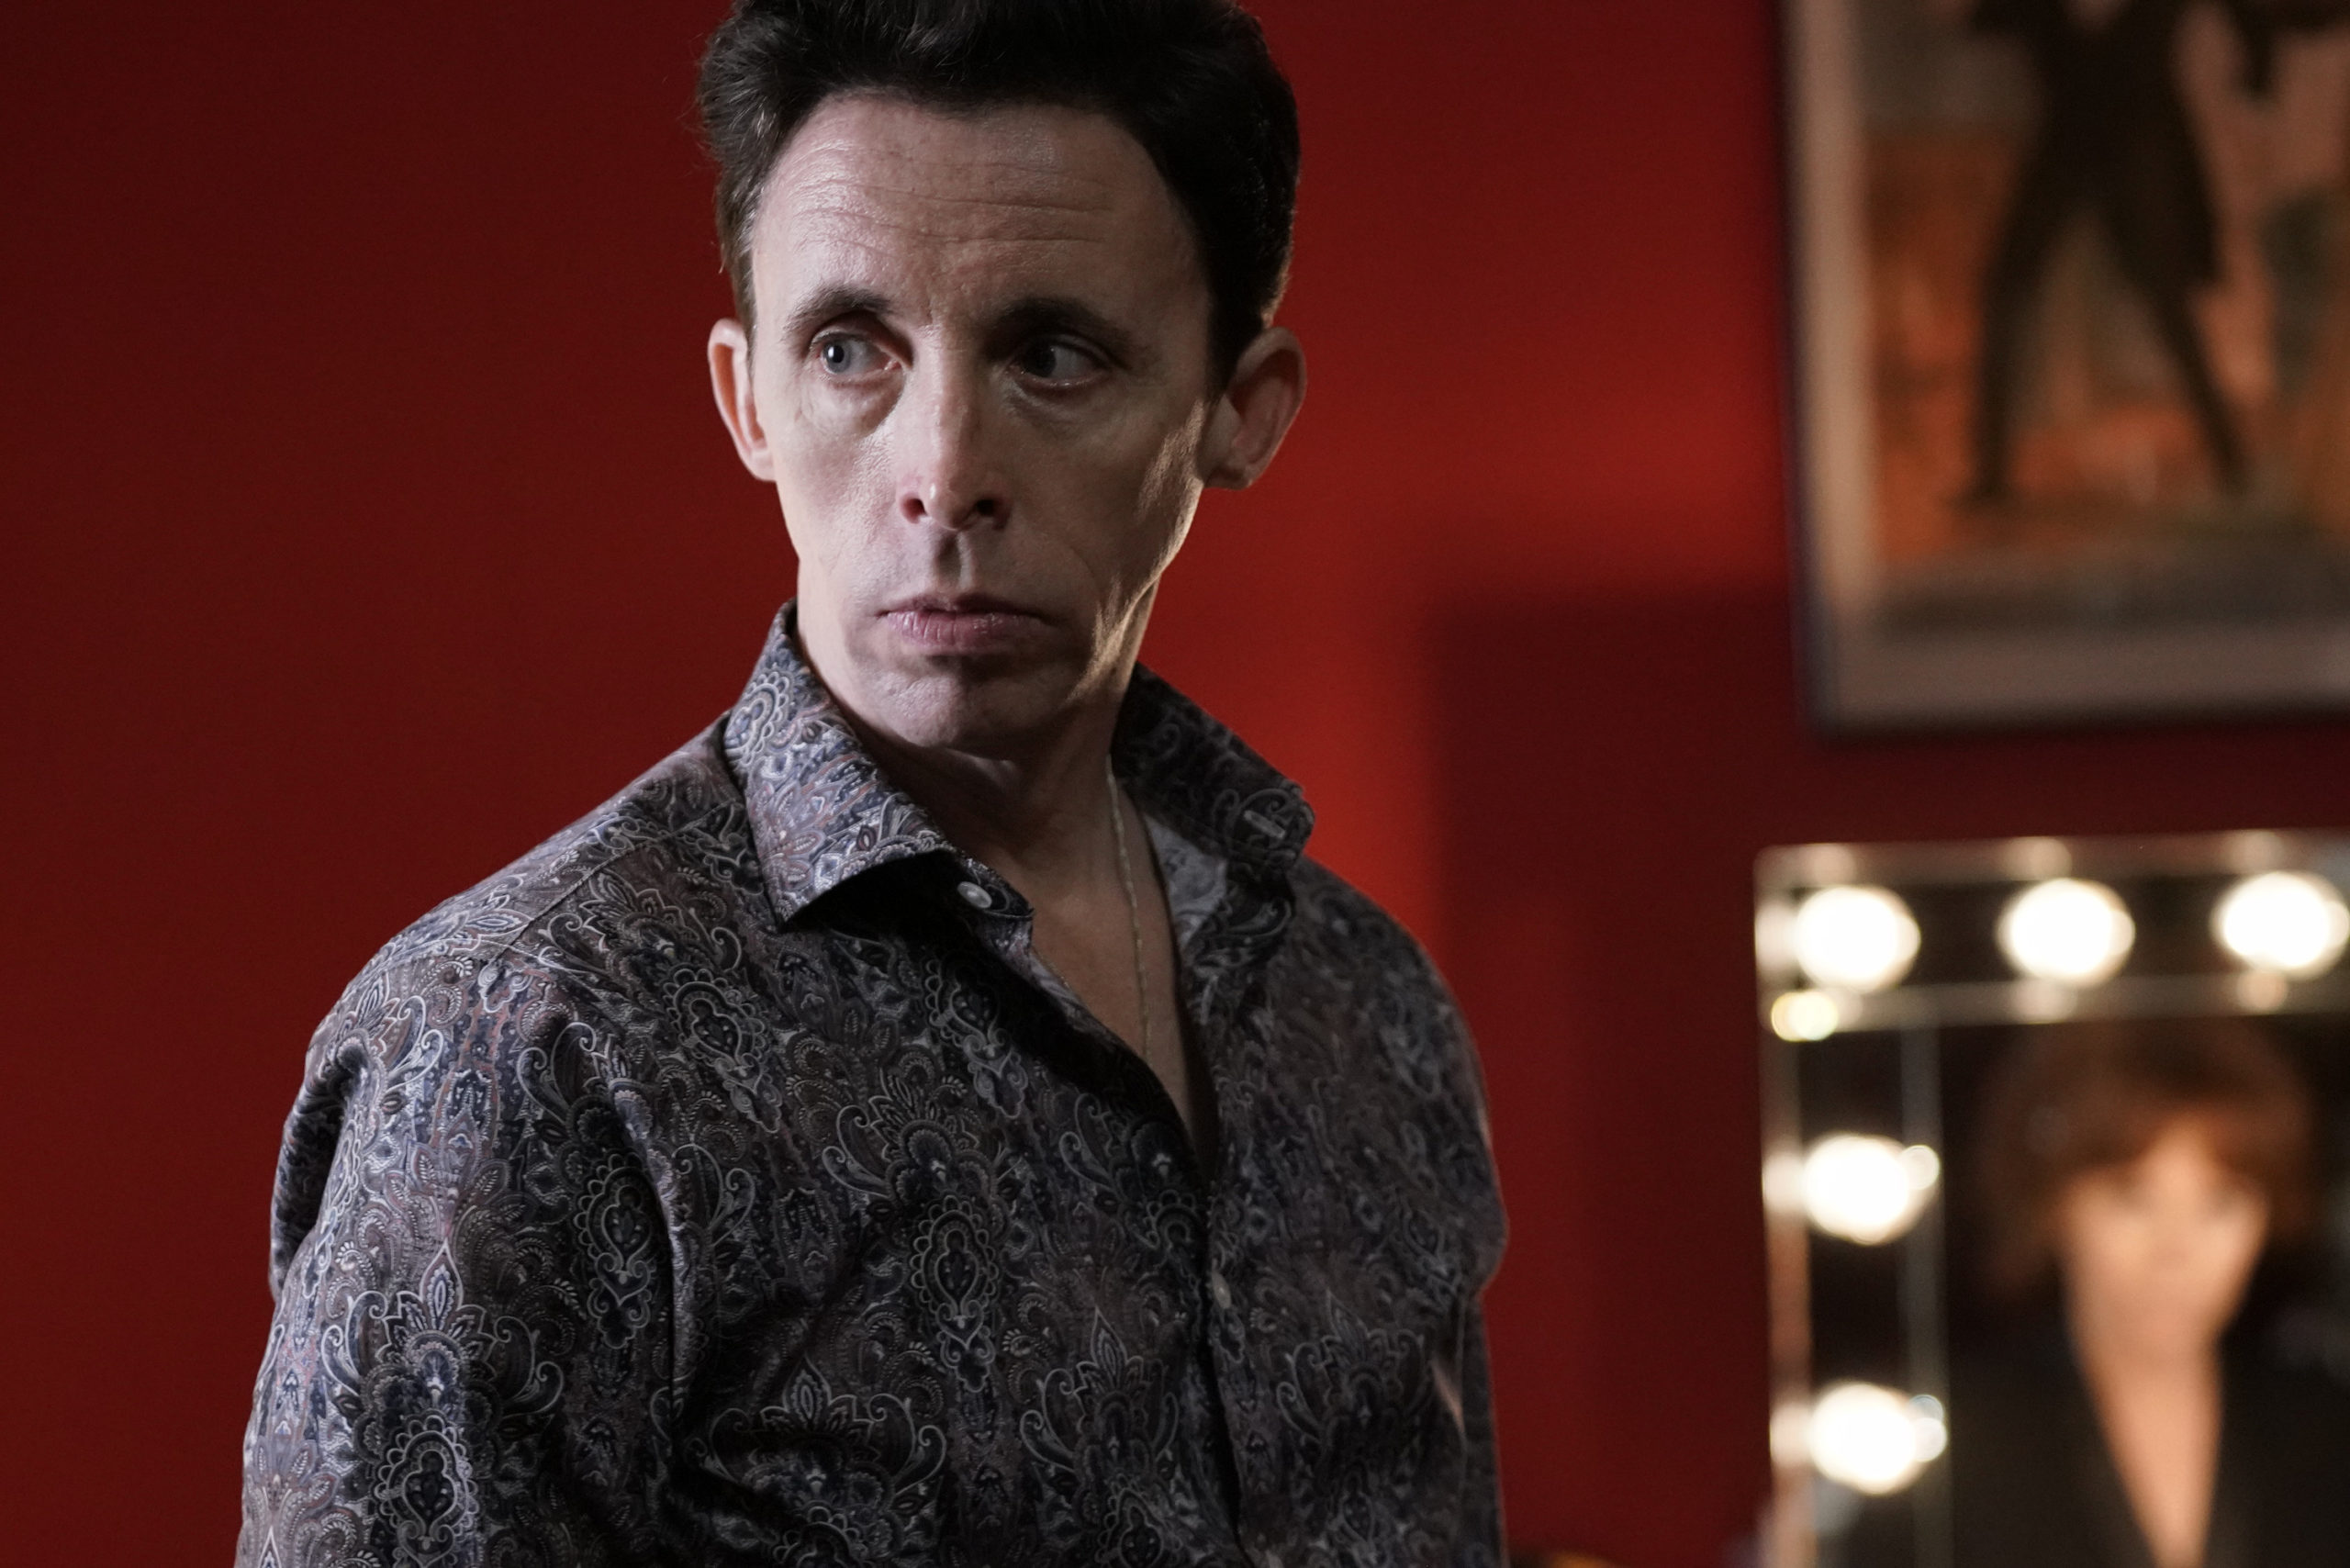 Kevin Cahoon, a white man with short brown hair, wears a worried expression and a dark colored, white-patterned button-down shirt. The lights of a dressing room mirror can be seen in the background.